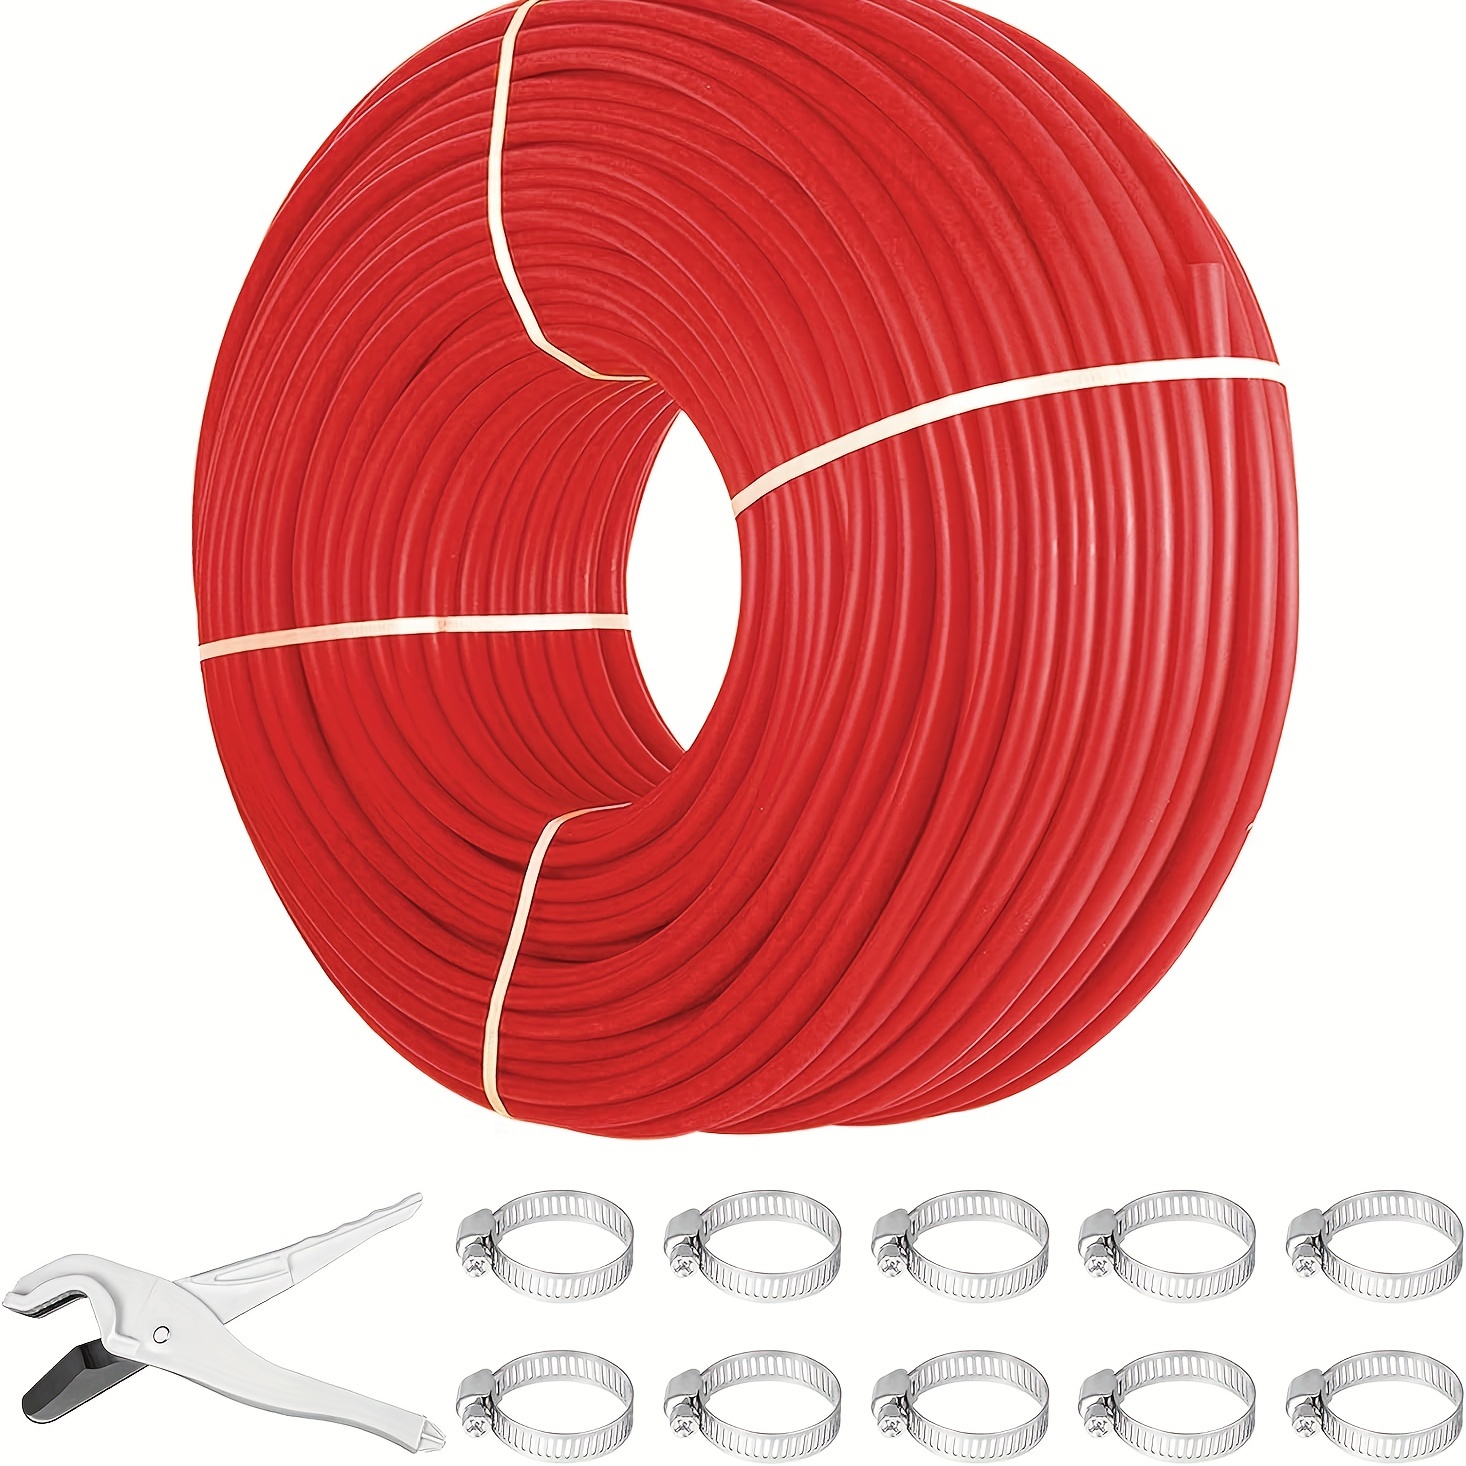 

Pex Tube 1000ft, Pex A Pipe, Flexible 1/2 Inch Pex Pipe, Easy Installation For Residential Commercial Radiant Floor Heating System